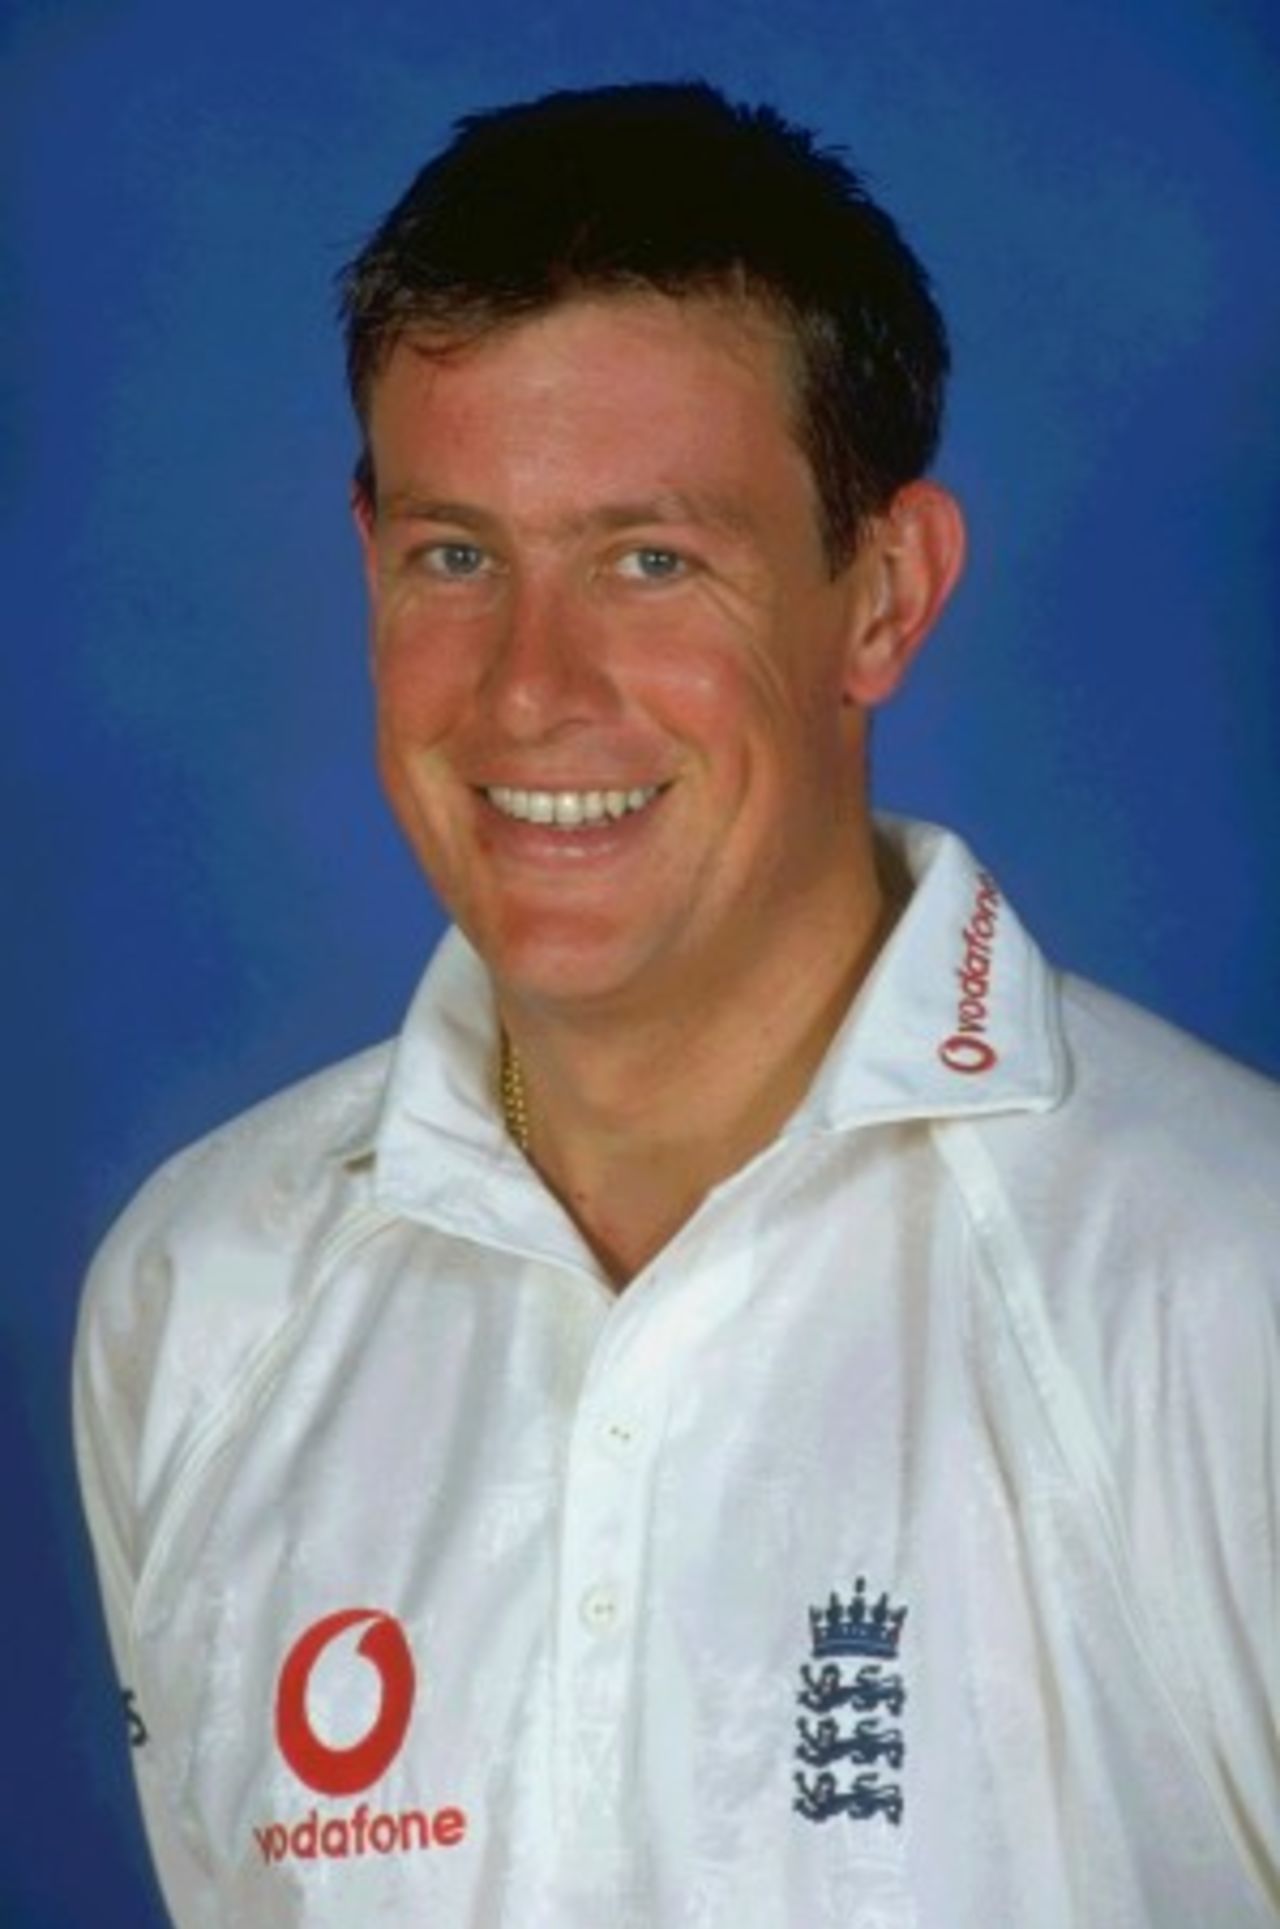 21 Sep 1999: Portrait of Ashley Giles of the England team taken at Lilleshall, England